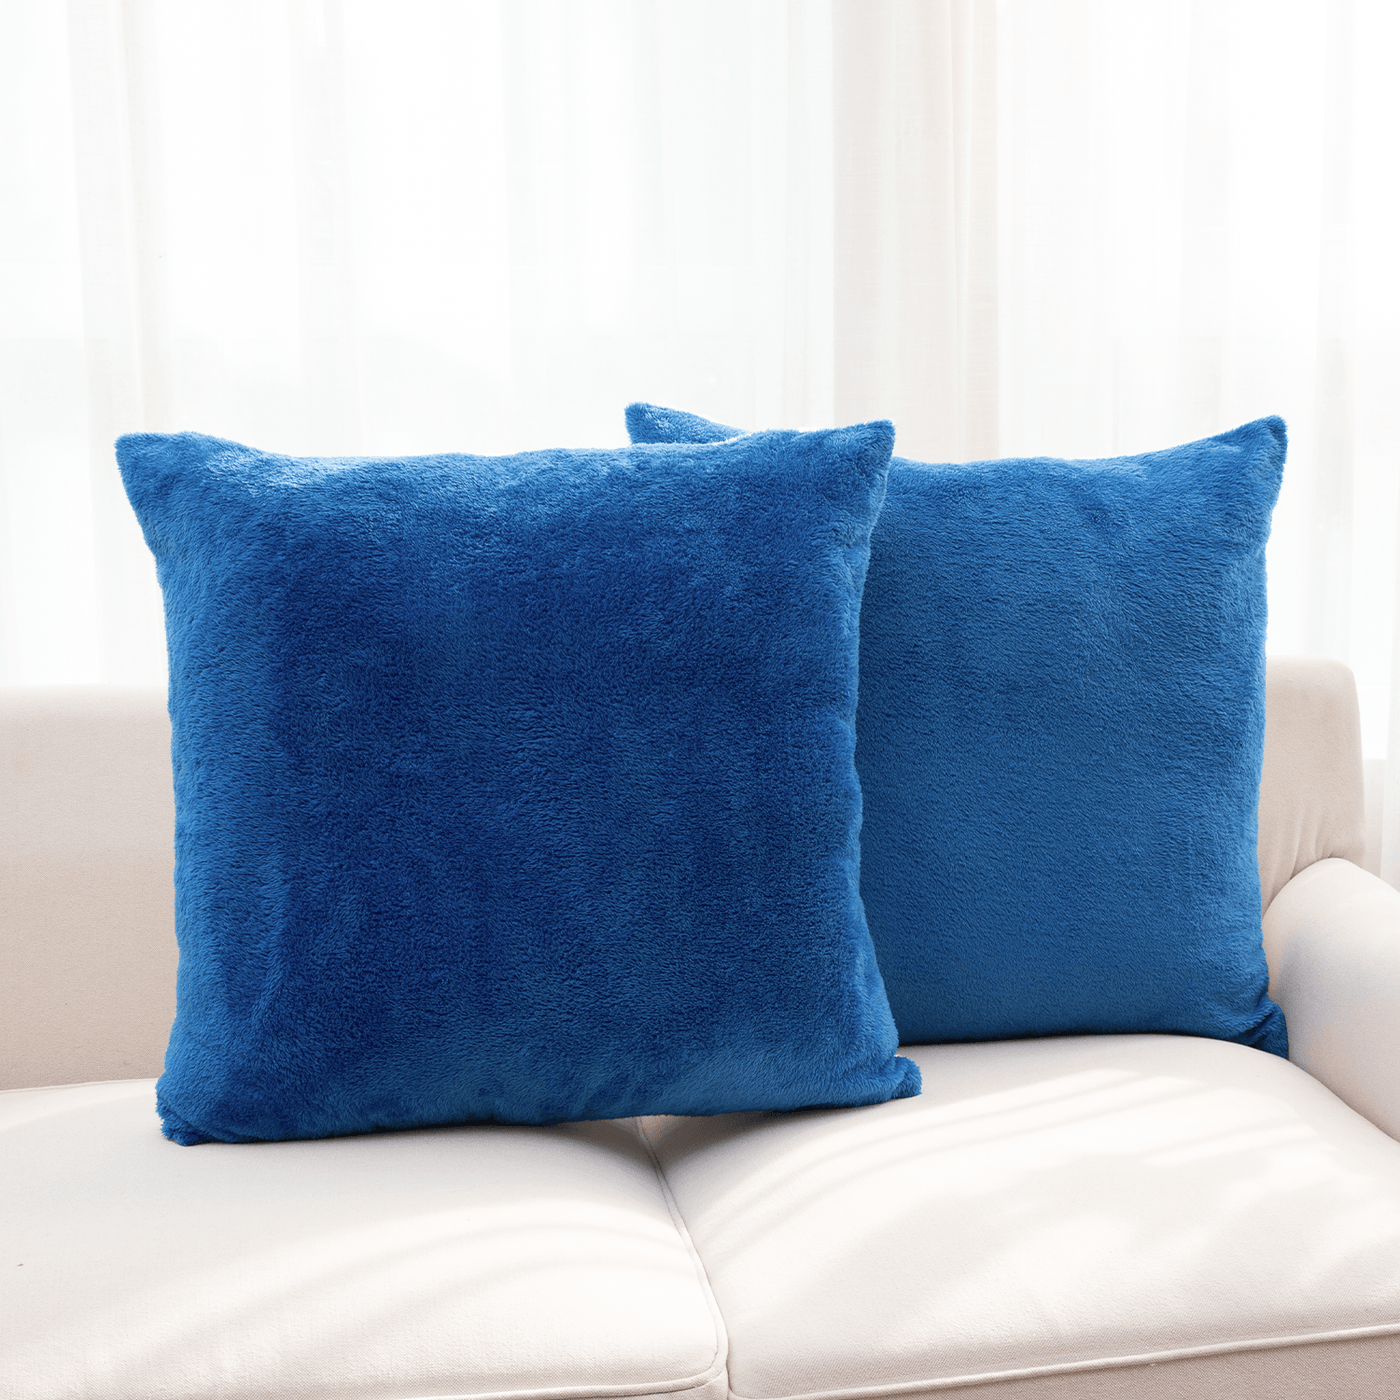 https://www.cheercollection.com/cdn/shop/products/cheer-collection-microsherpa-throw-pillow-ultra-soft-and-fluffy-elegant-home-decor-velvet-stylish-accent-pillows-18-x-18-set-of-2-423288_1400x.png?v=1678133846